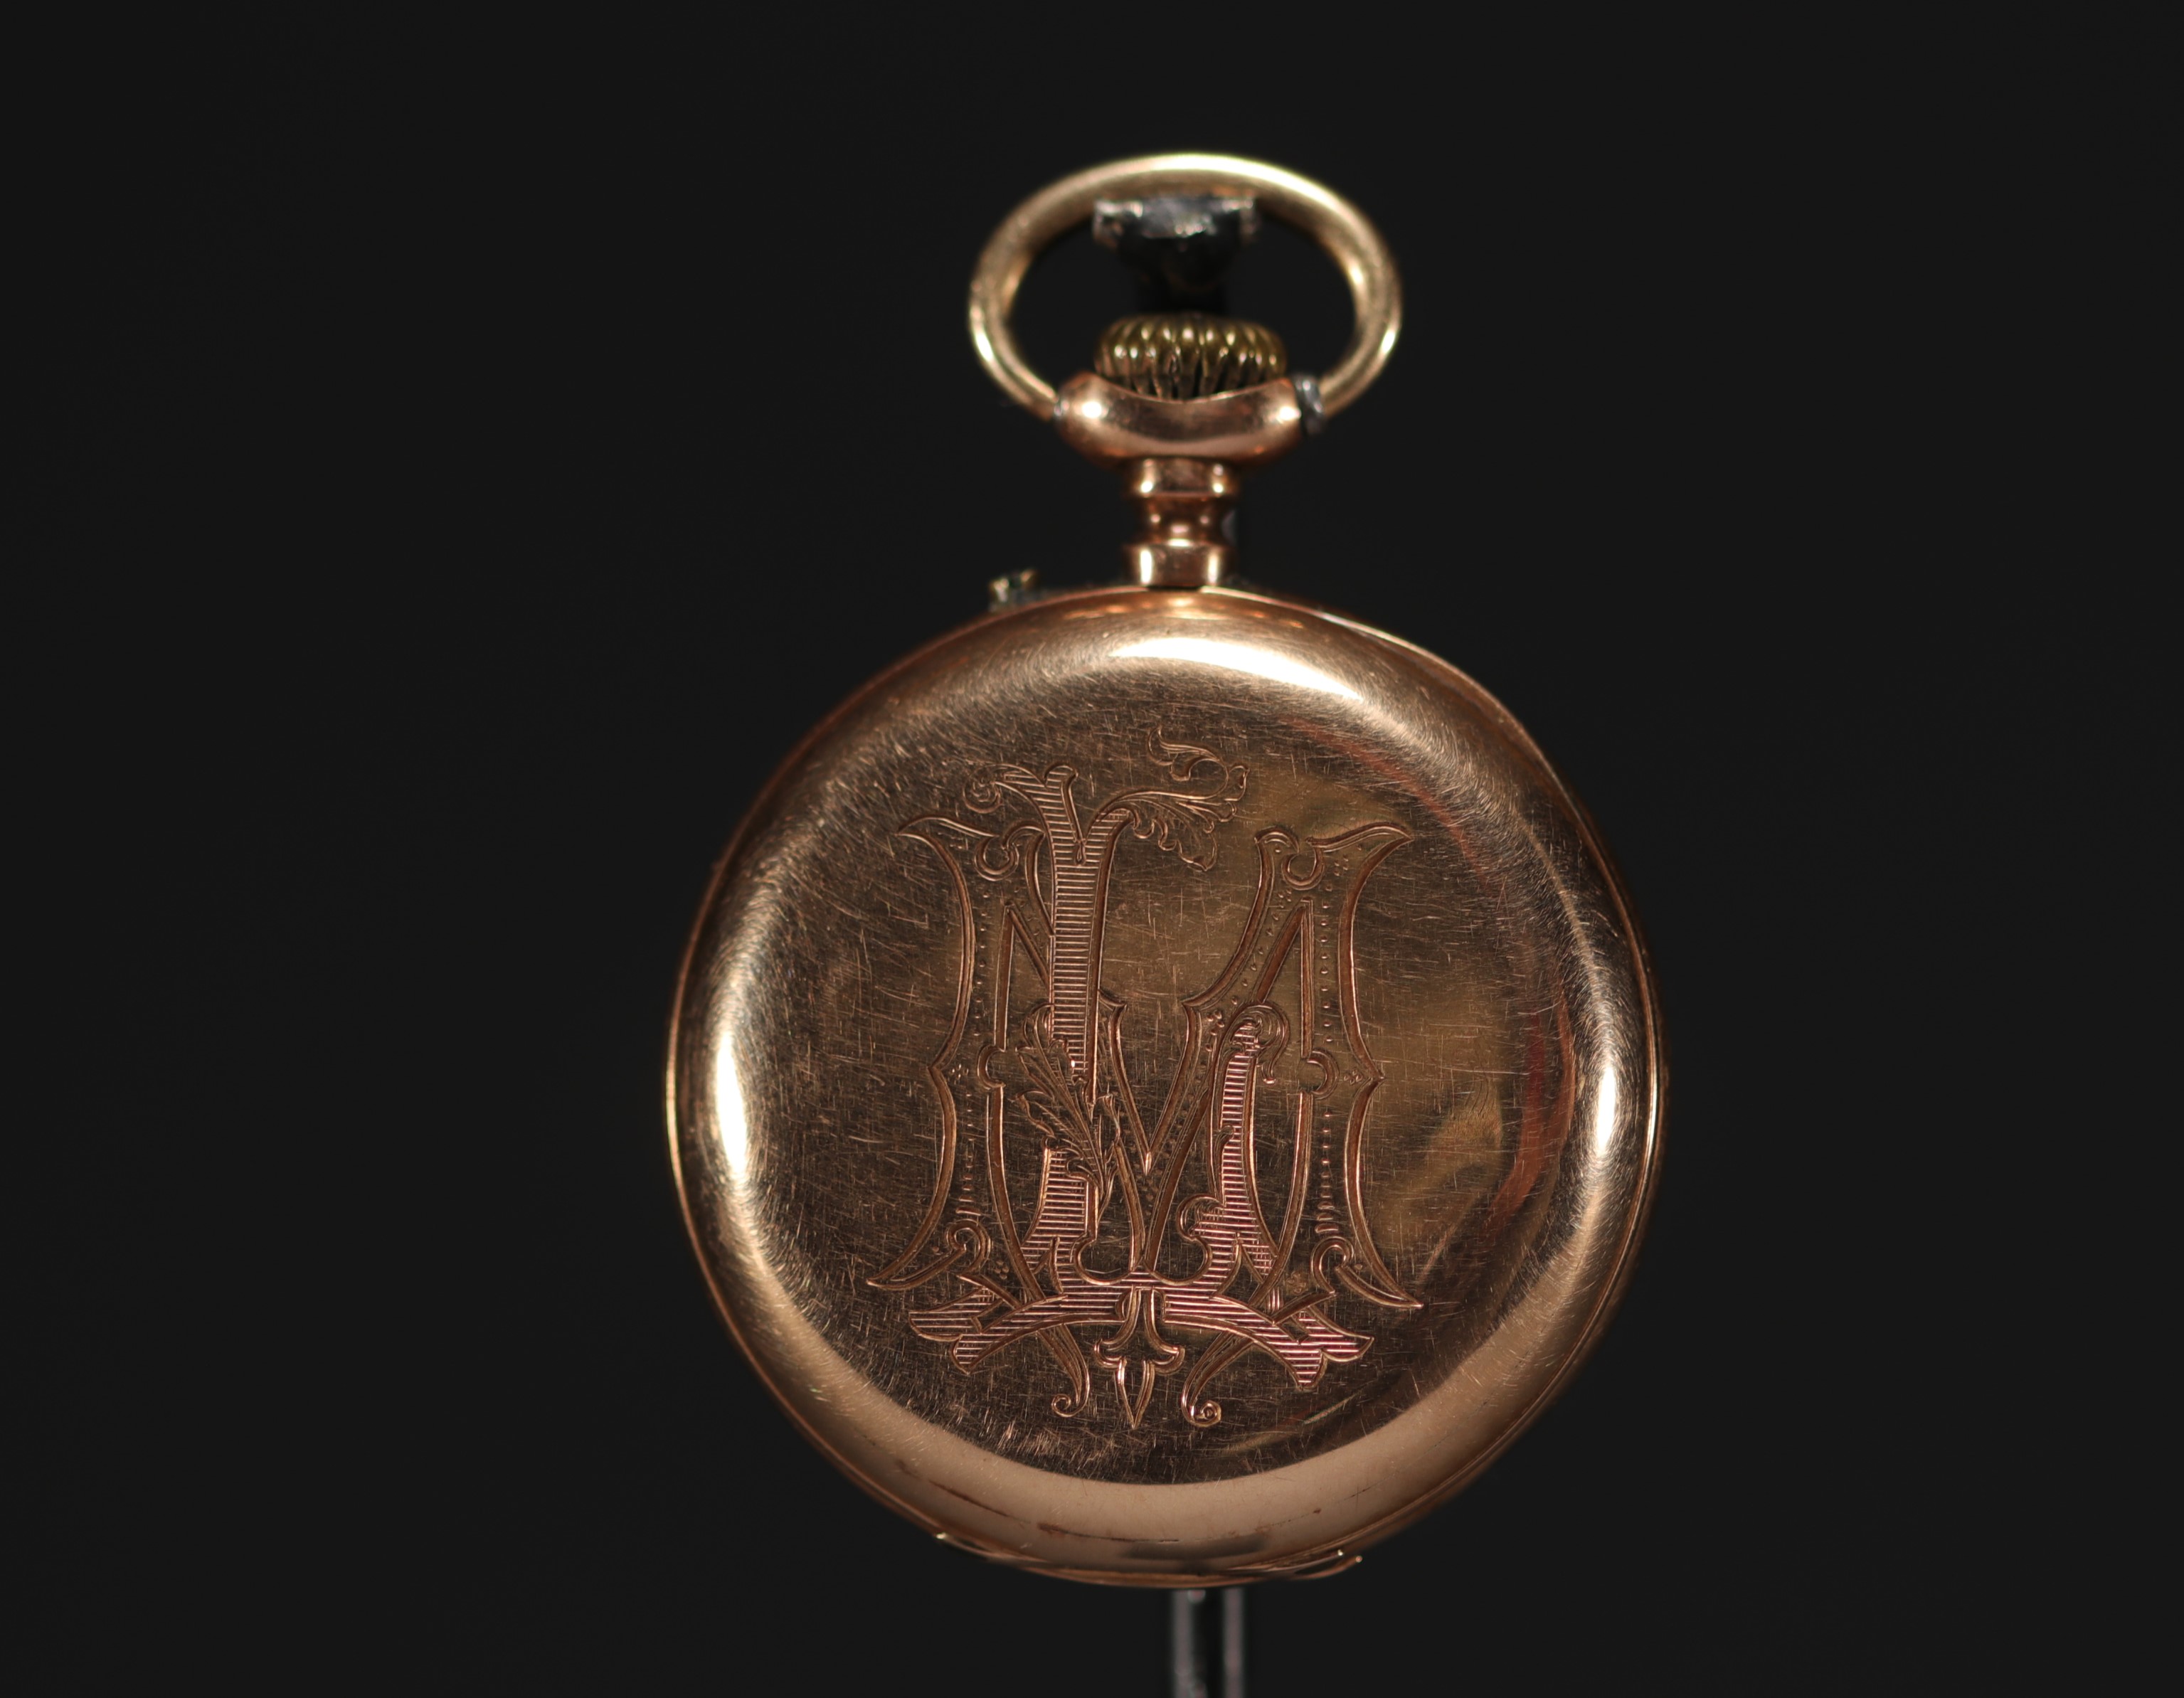 18k gold "Pateck Geneve Cylindre 10 Rubis" pocket watch, total weight 69.9 g. - Image 3 of 3